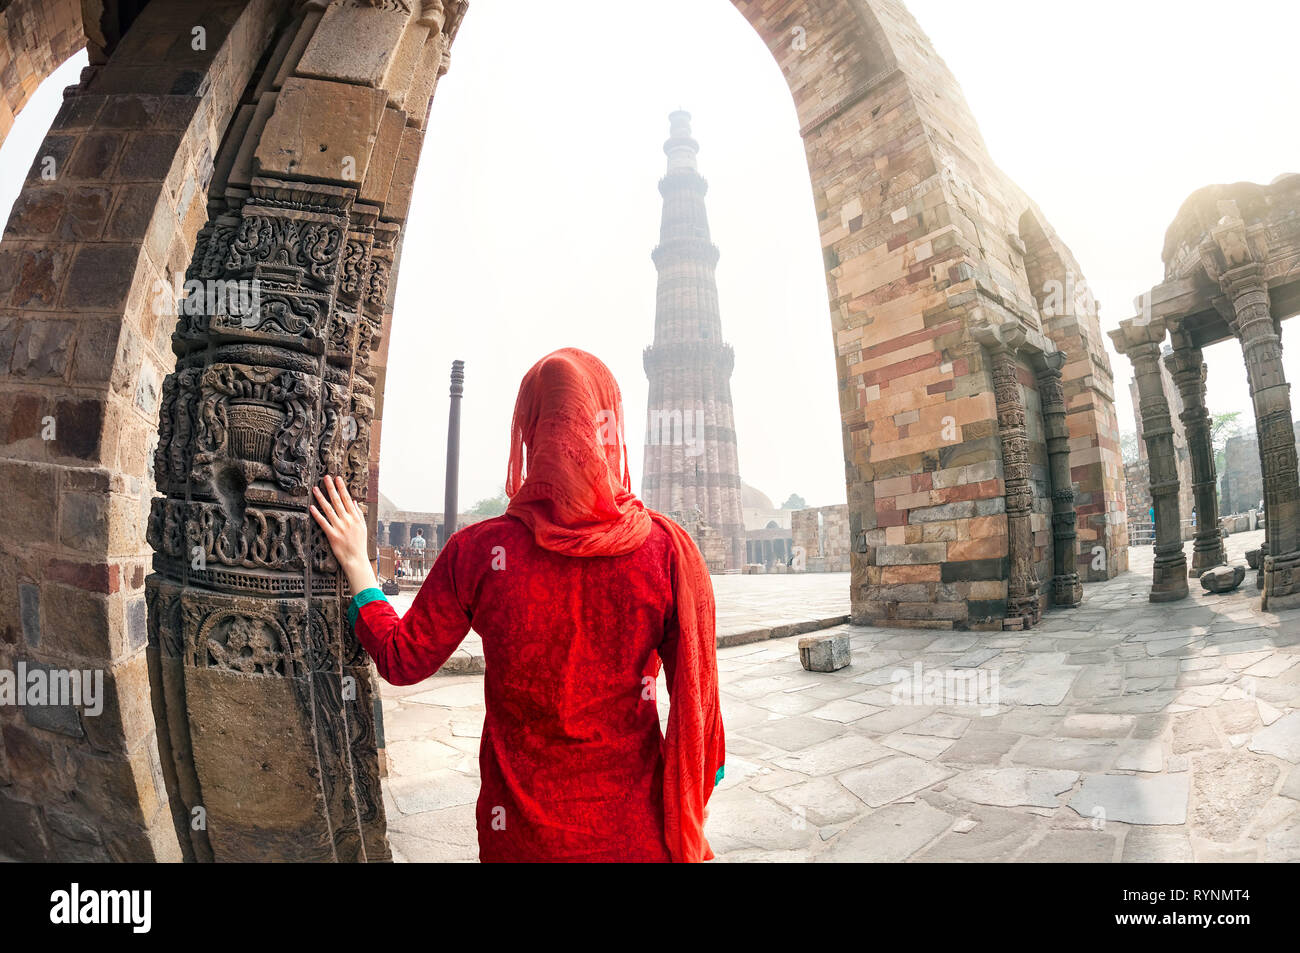 Woman in red costume looking at Qutub Minar tower in Delhi, India Stock Photo